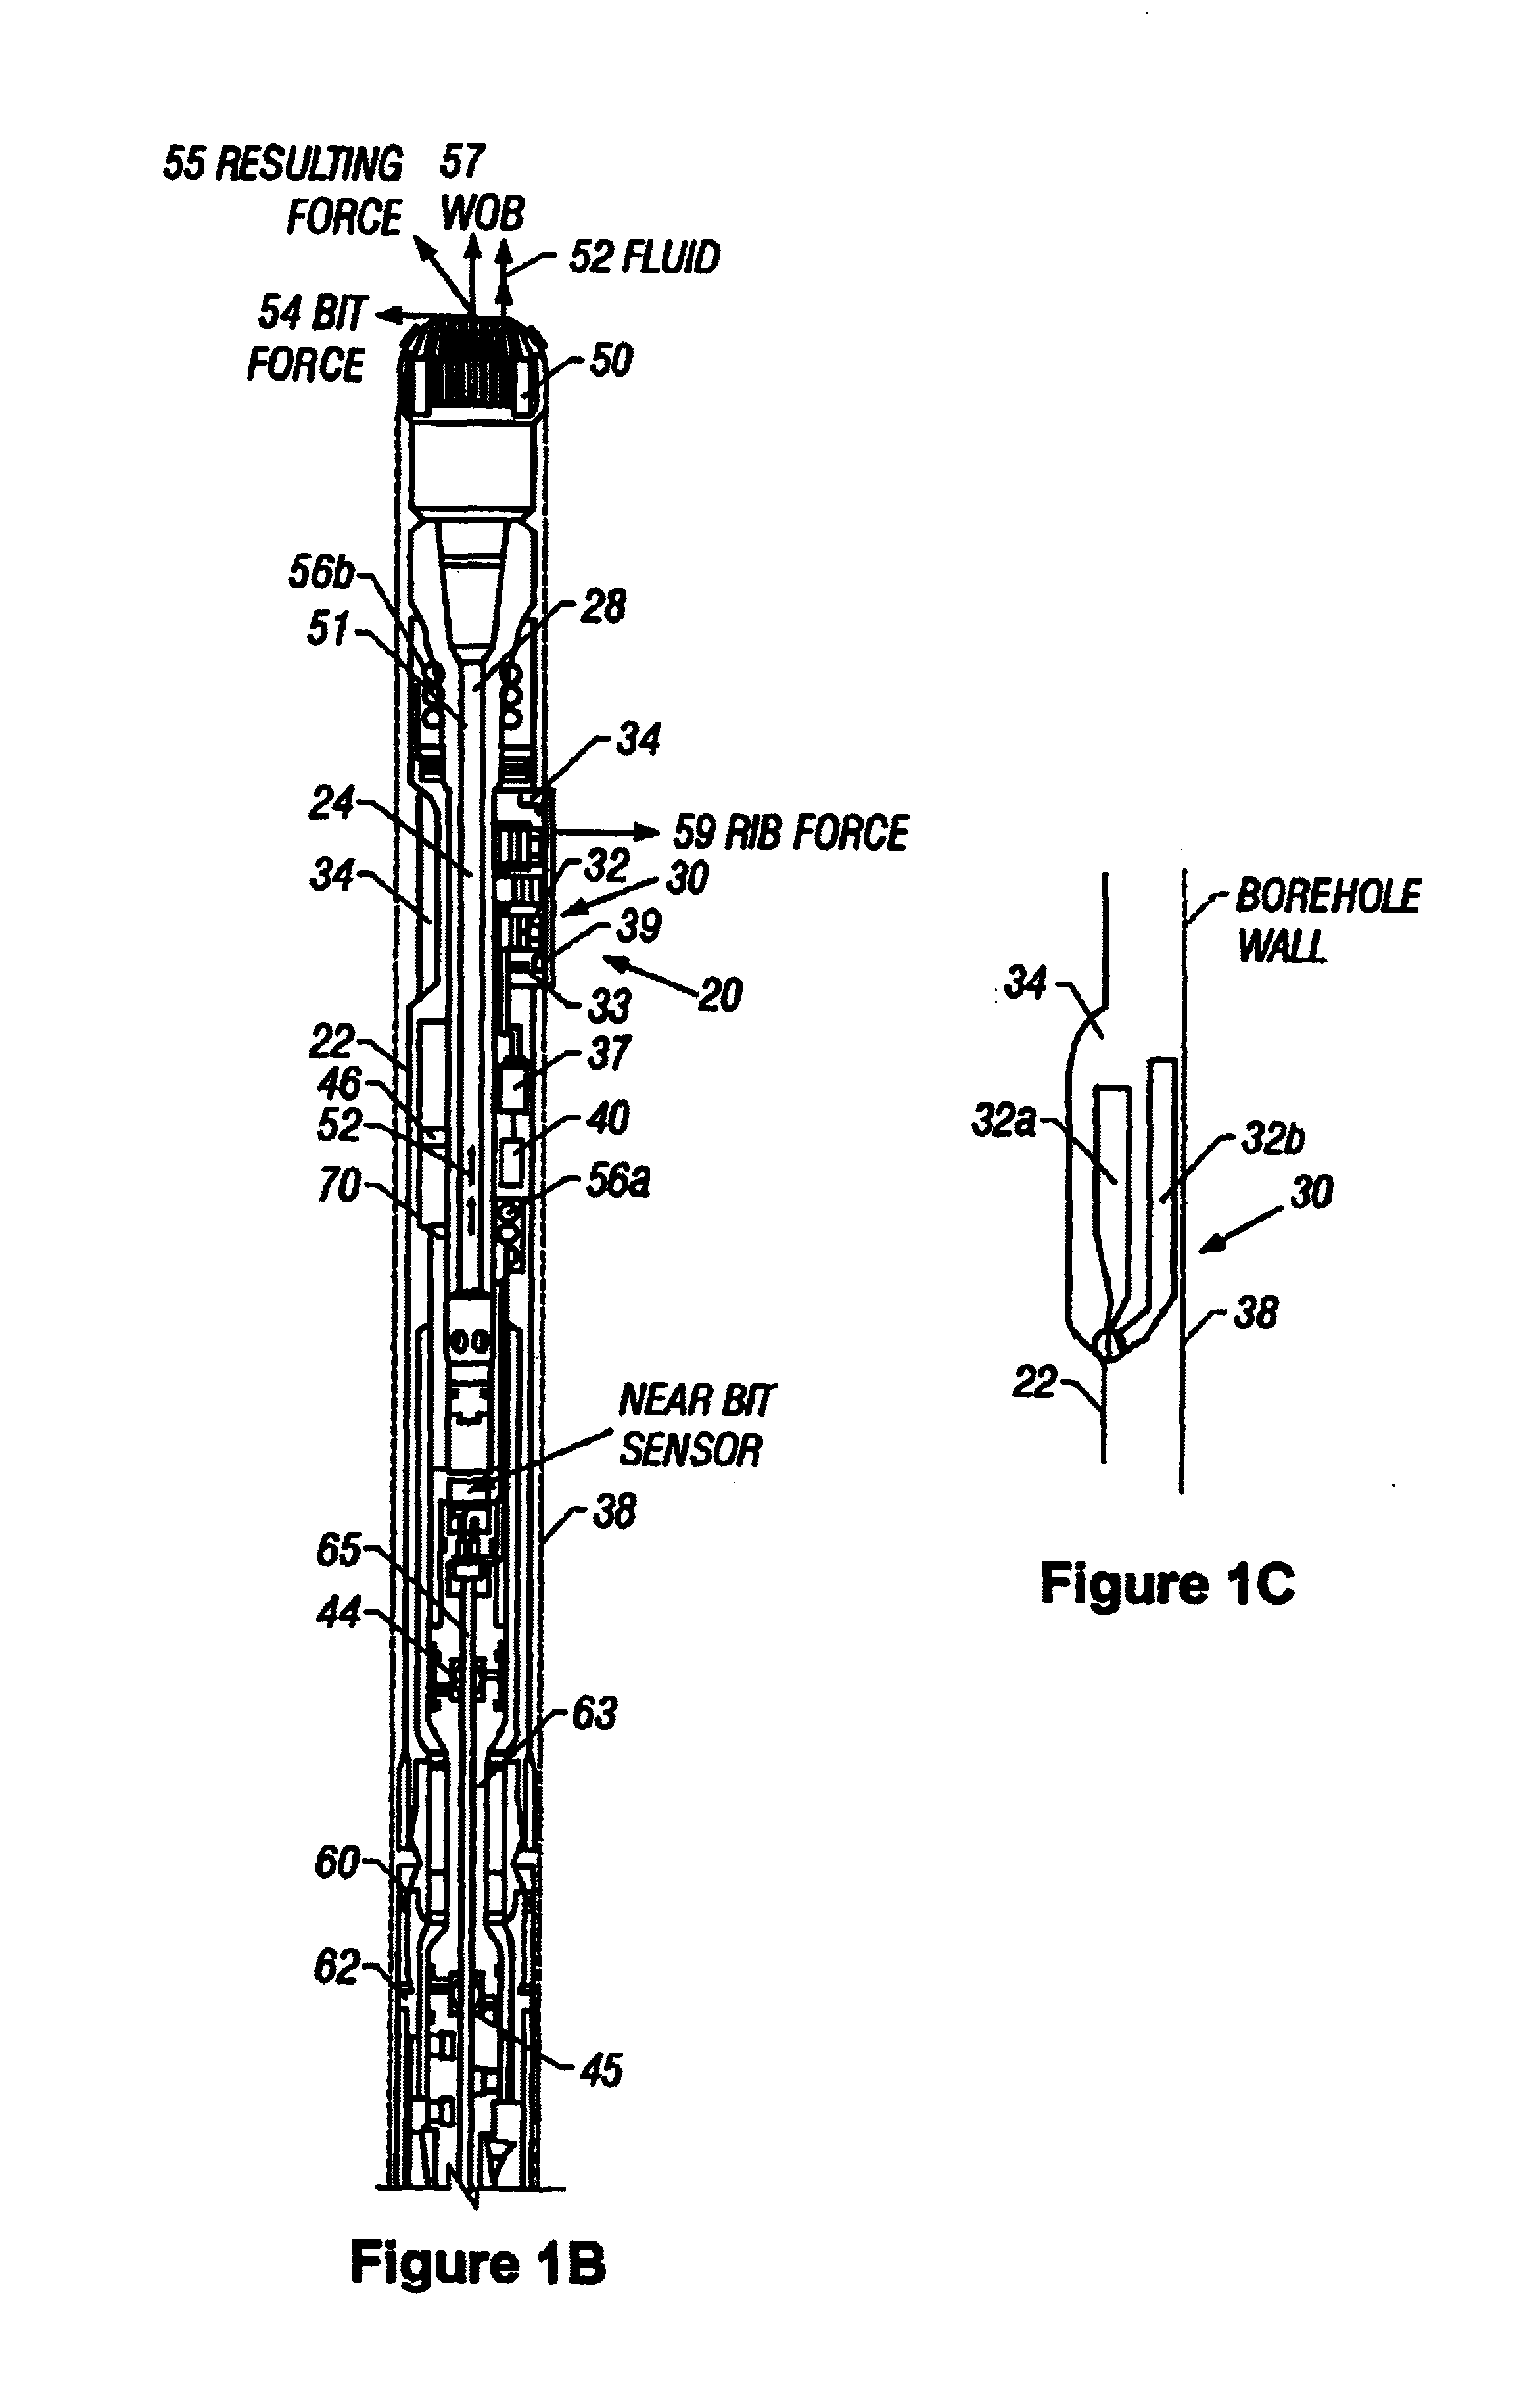 Drilling assembly with a steering device for coiled-tubing operations